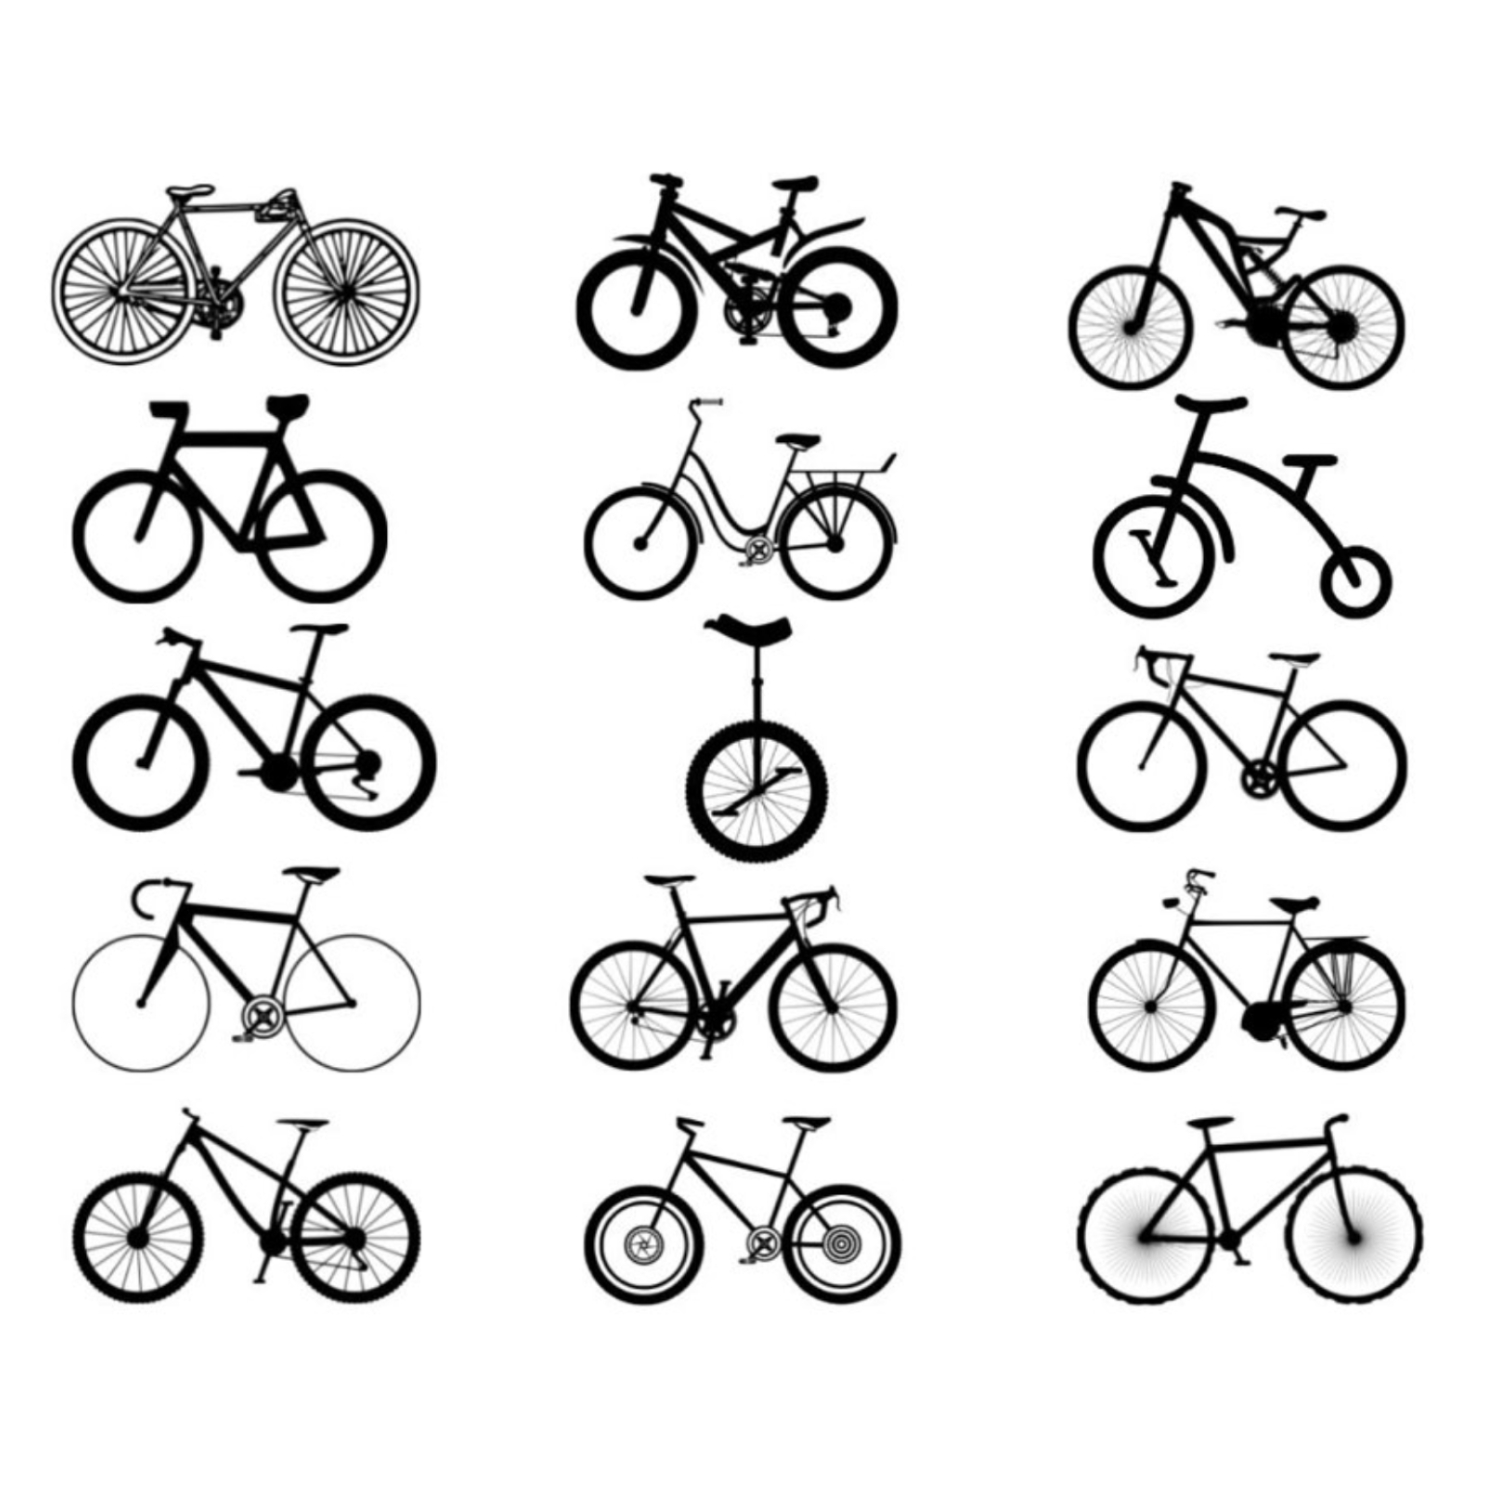 Bicycle Silhouette Vector.